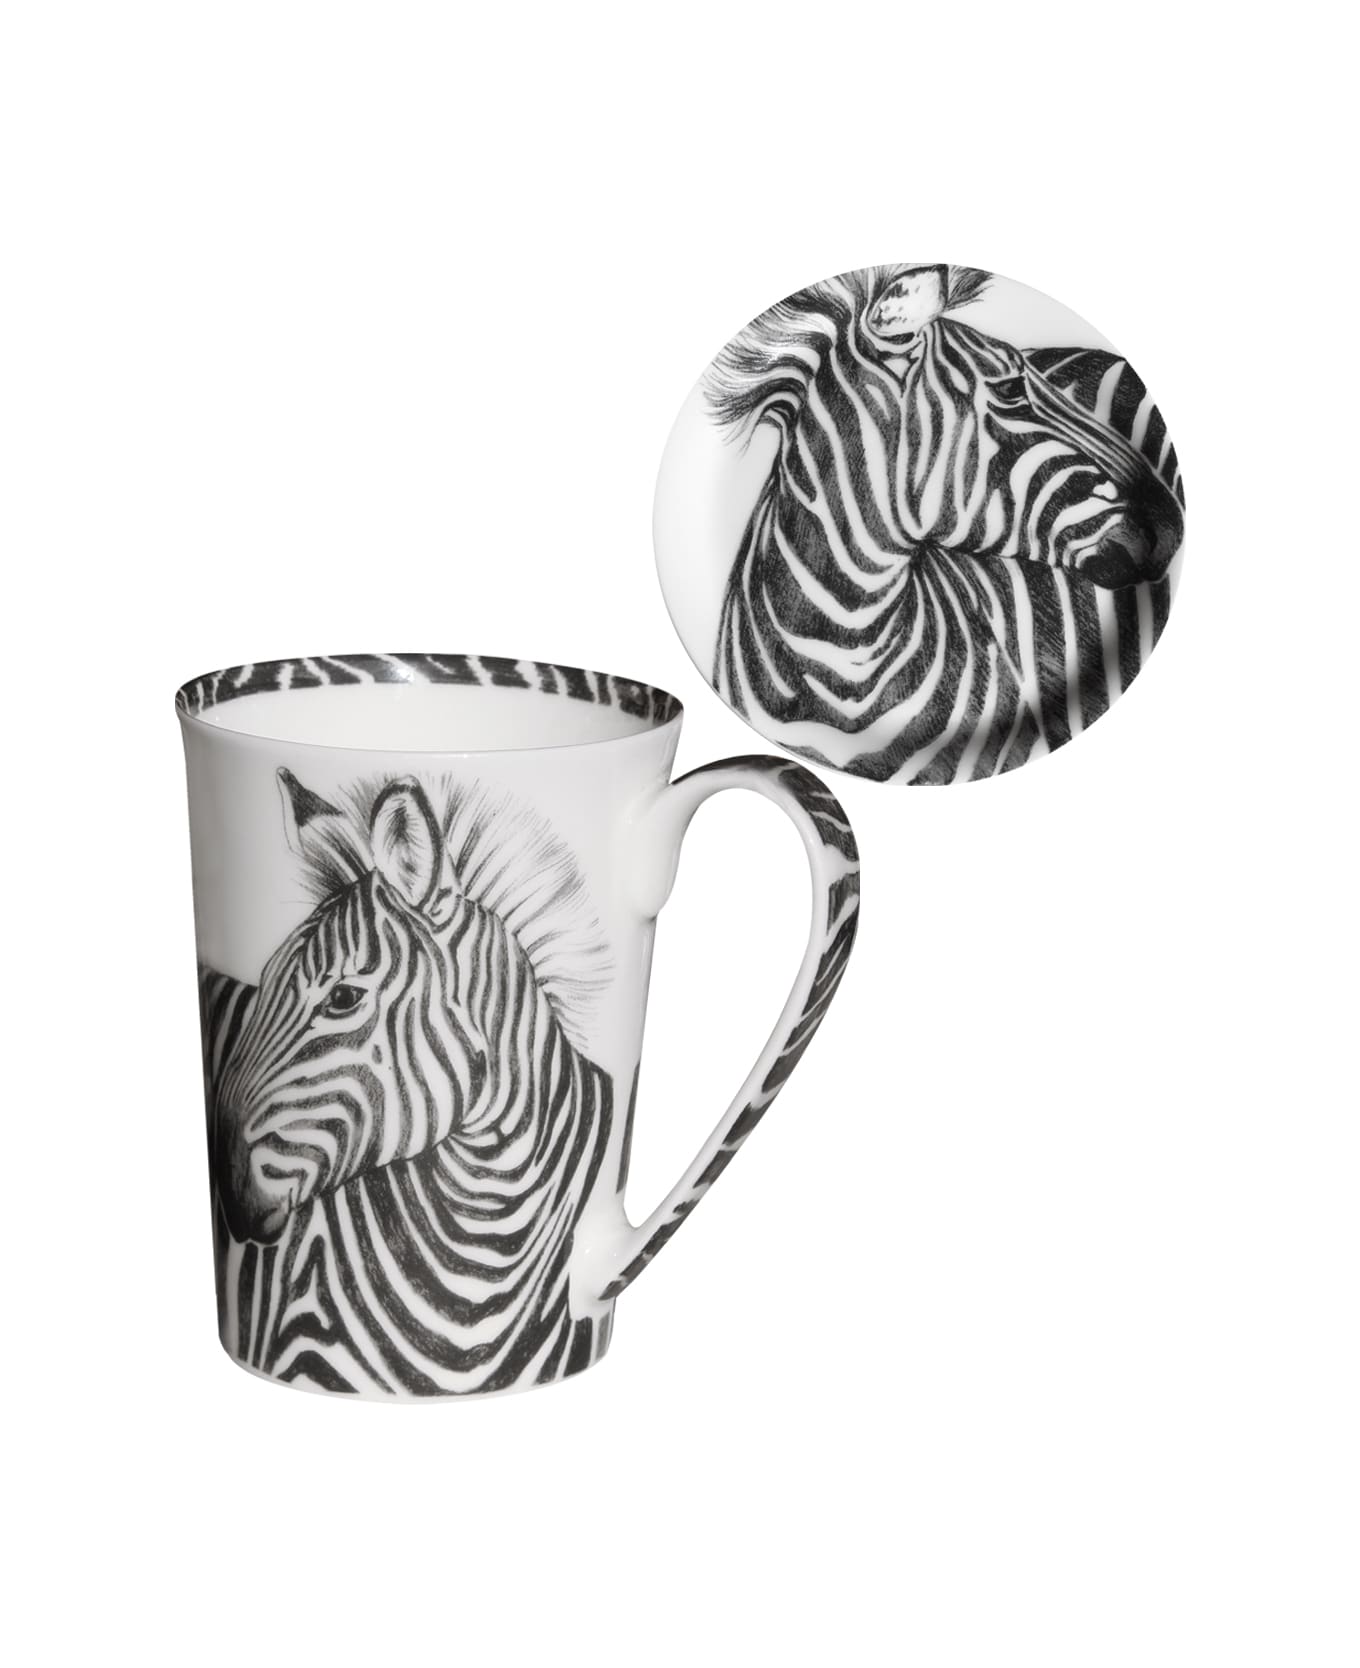 Taitù Assorted Set of 4 Covered Mugs - Wild Spirit Collection - Black